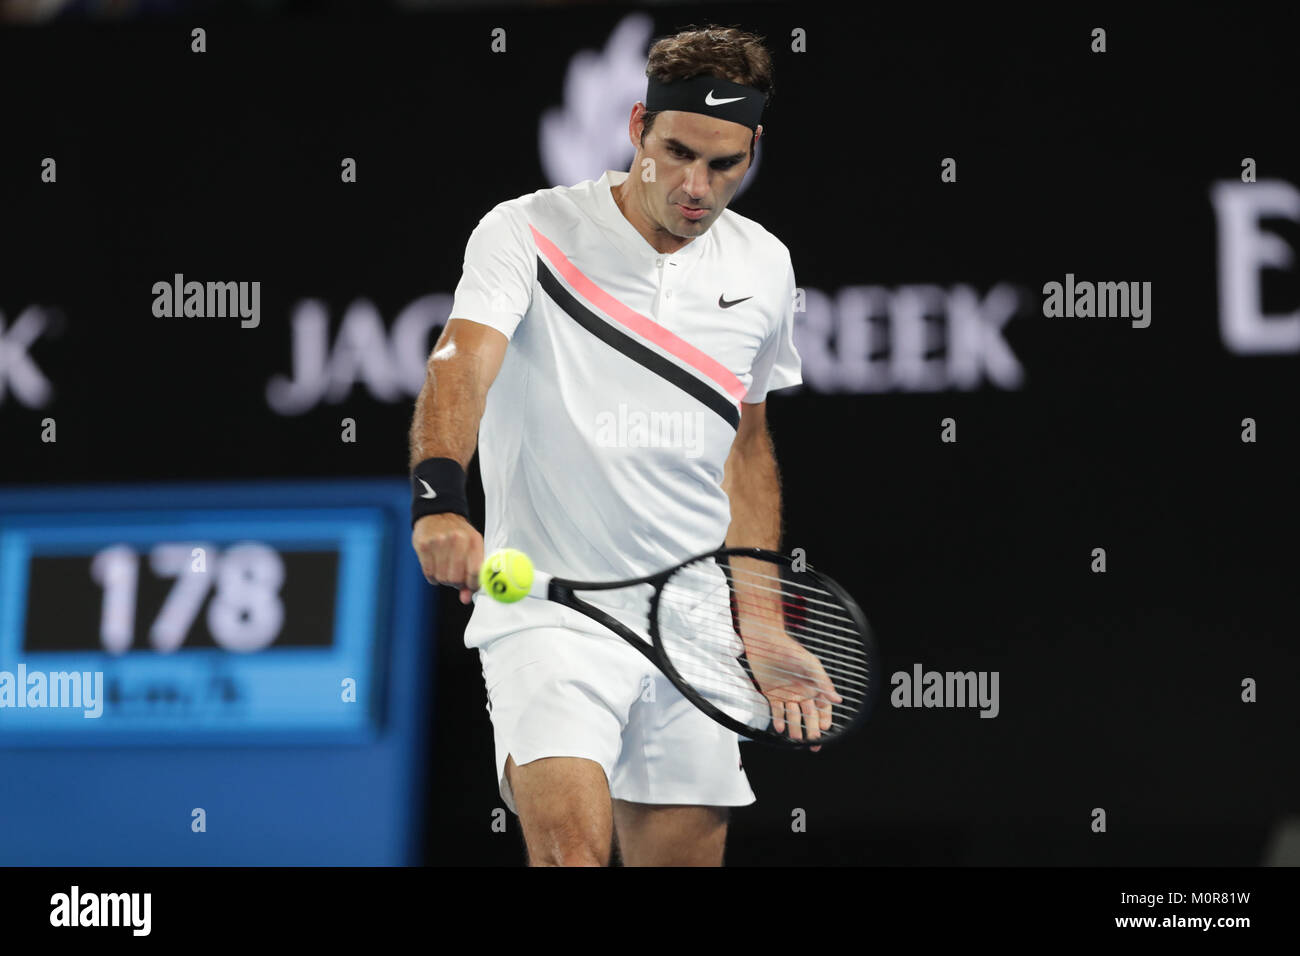 Melbourne, AustraliaSwiss tennis player Roger Federer is in action during his 1/4 final match at the Australian Open vs Czech tennis player Tomas Berdych on Jan 24, 2018 in Melbourne, Australia - ©Yan Lerval/Alamy Live News Stock Photo